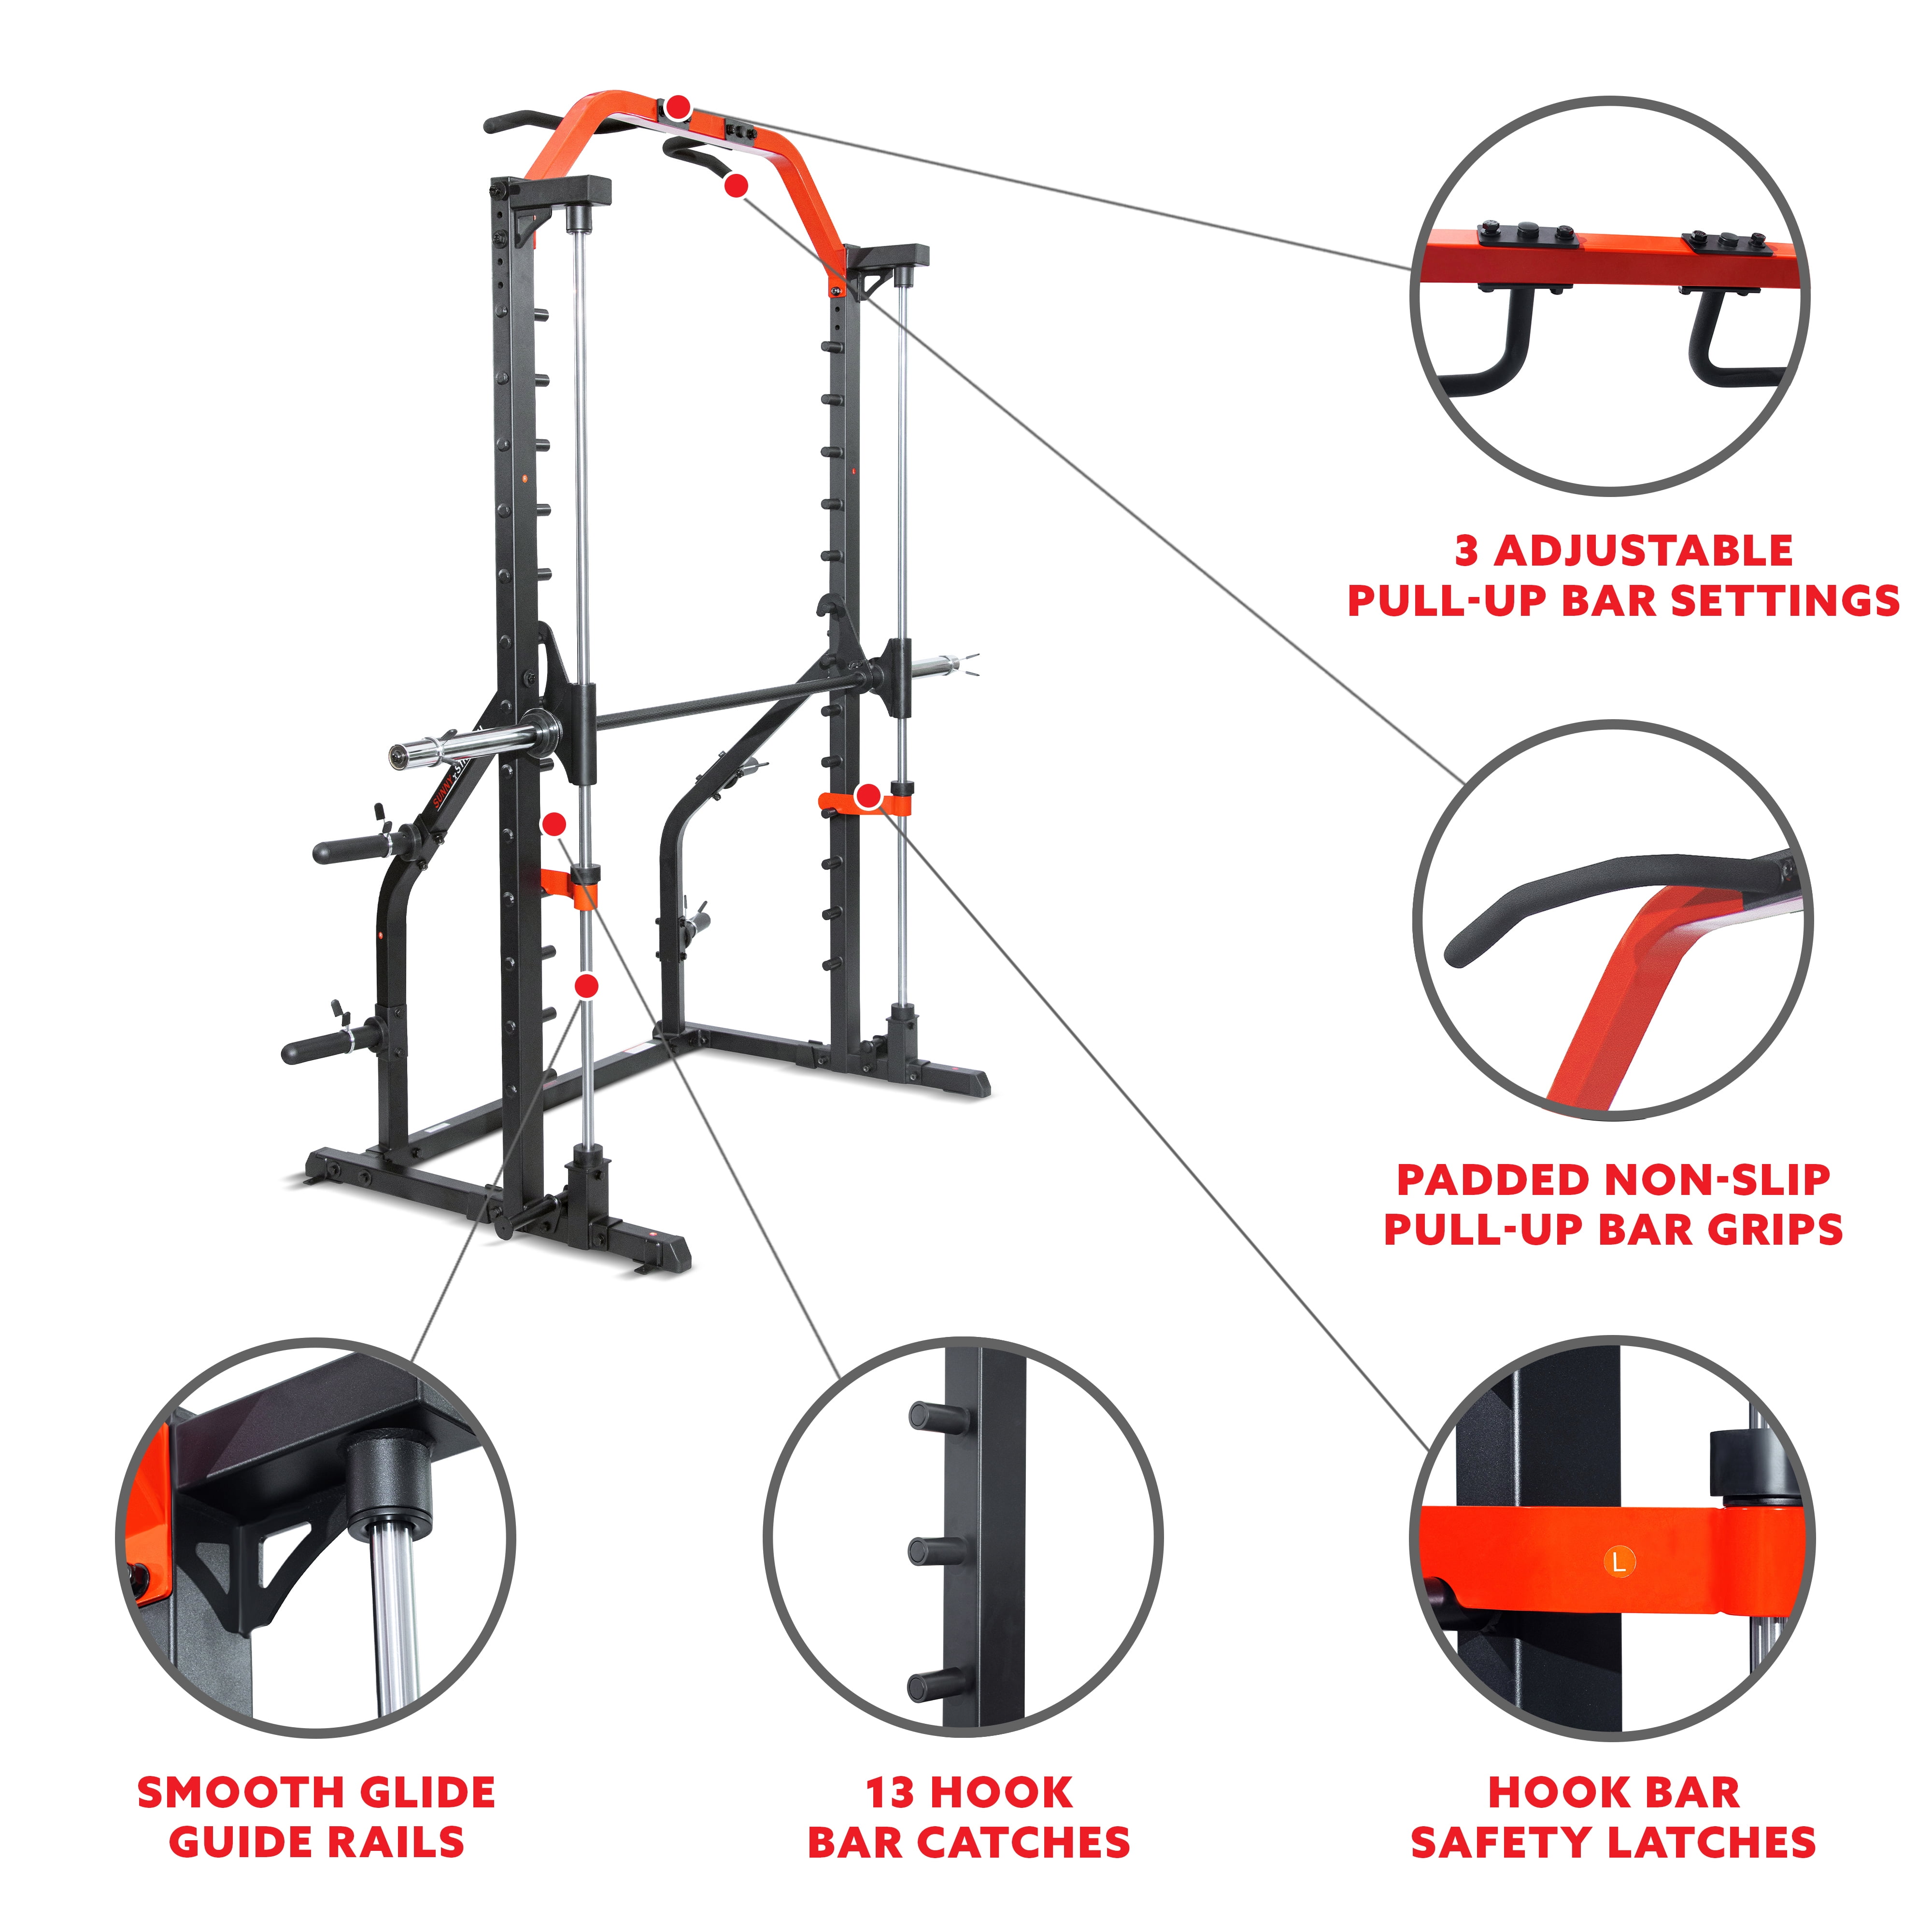 Adjustable Fitness Sunny Premium & Pull 1 Machine for Gym Bar Multifunction Smith Rack Power Home Health – in Up 3 SF-XF920021 - Squat with